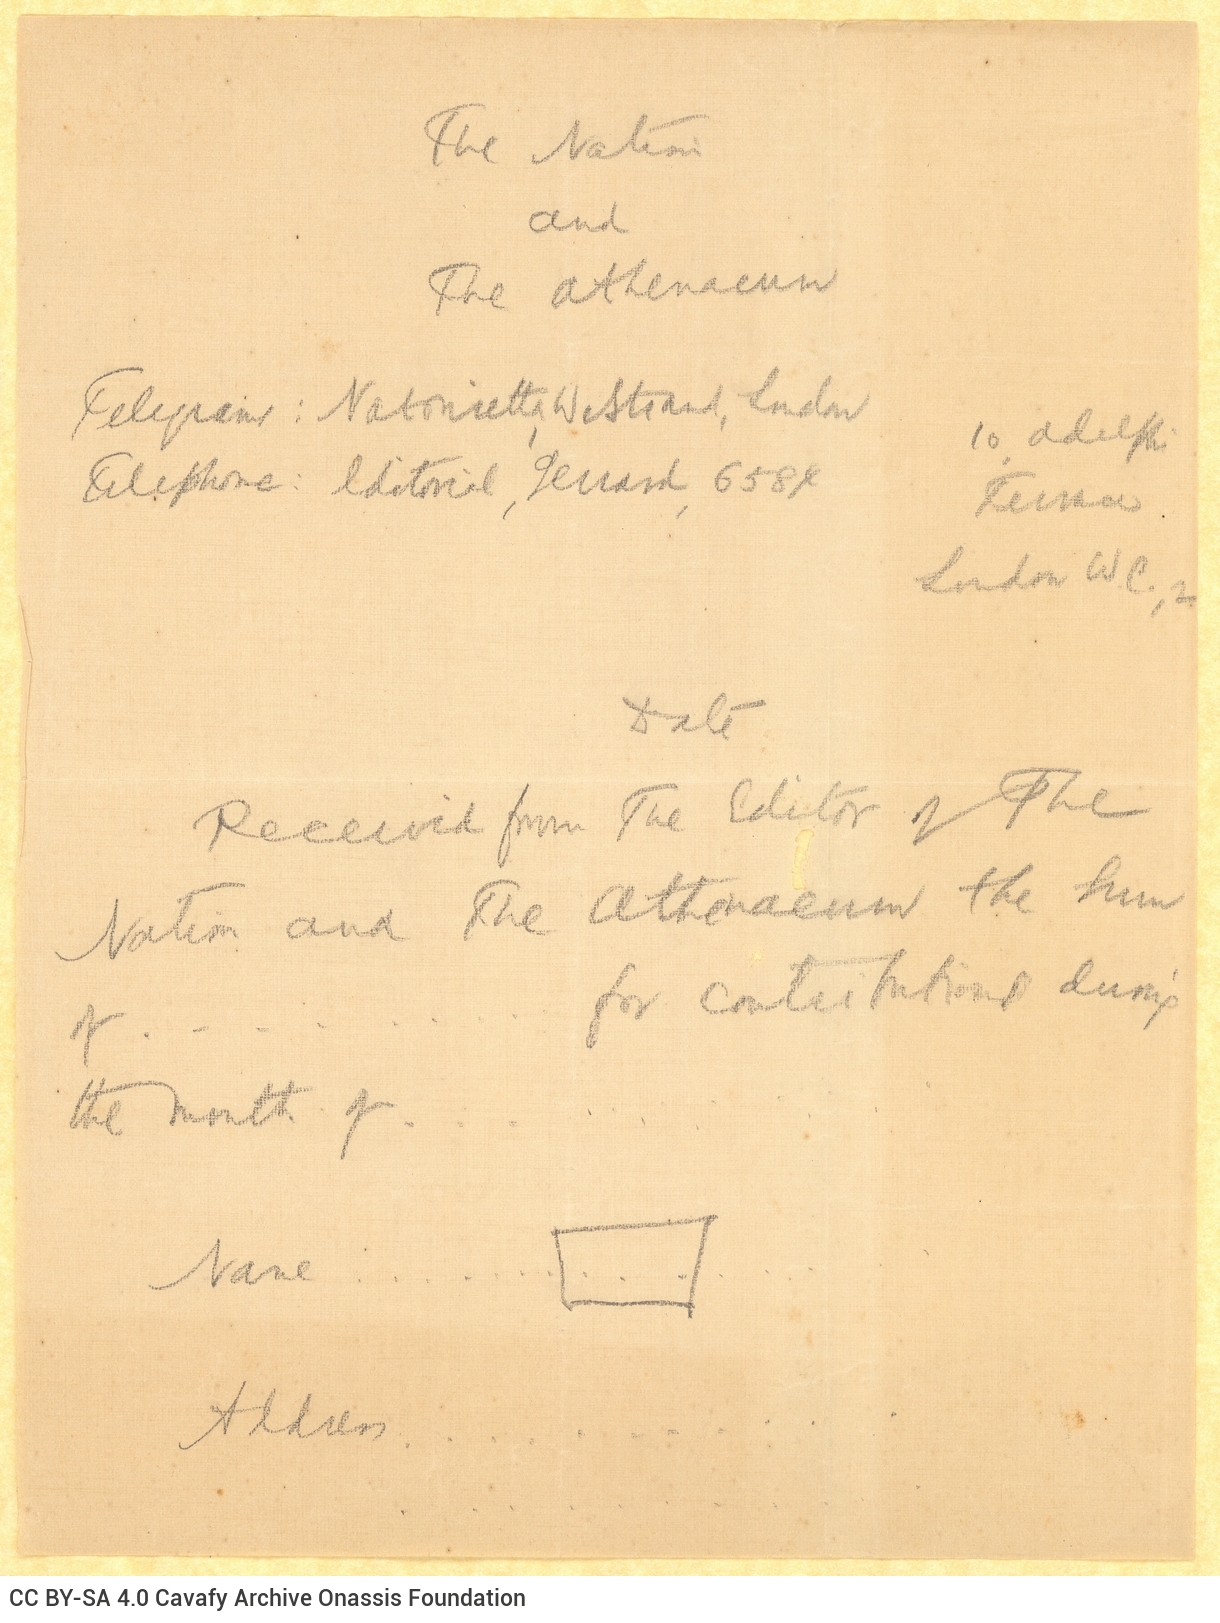 Handwritten draft of a receipt by Cavafy for the amount of £3,3 from *The Nation and The Athenaeum*. Accompanied by envelope